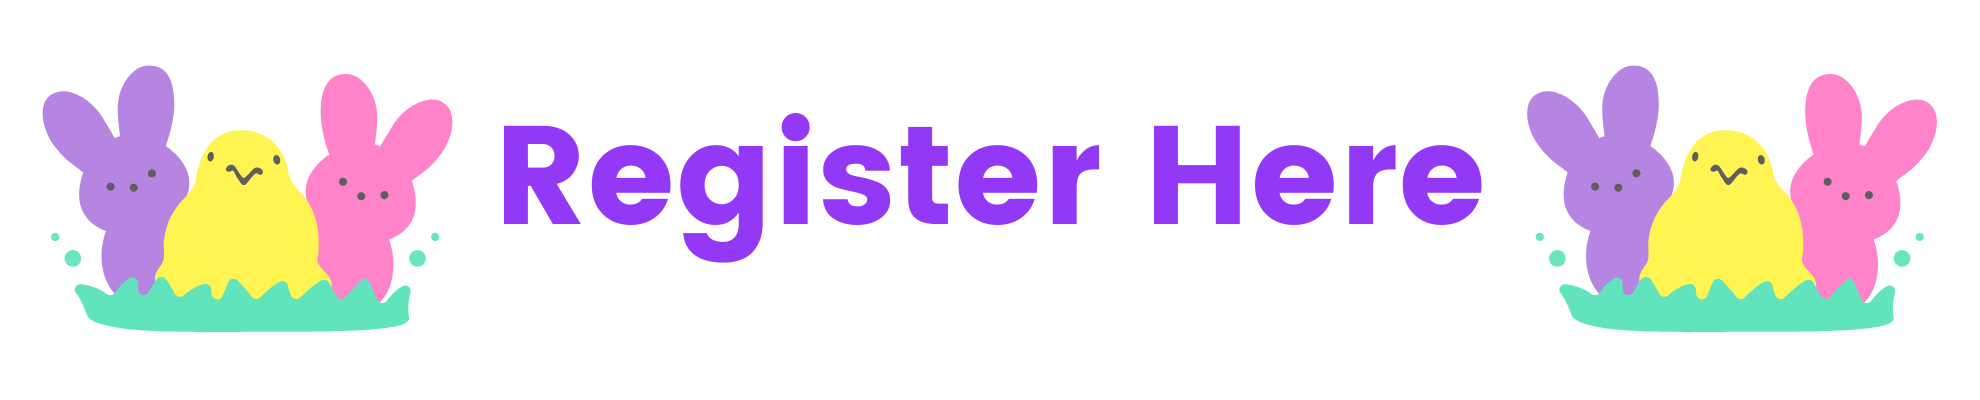 Text: Register Here<br />
Purple and Pink bunny peeps and a yellow chick  on each side of the text